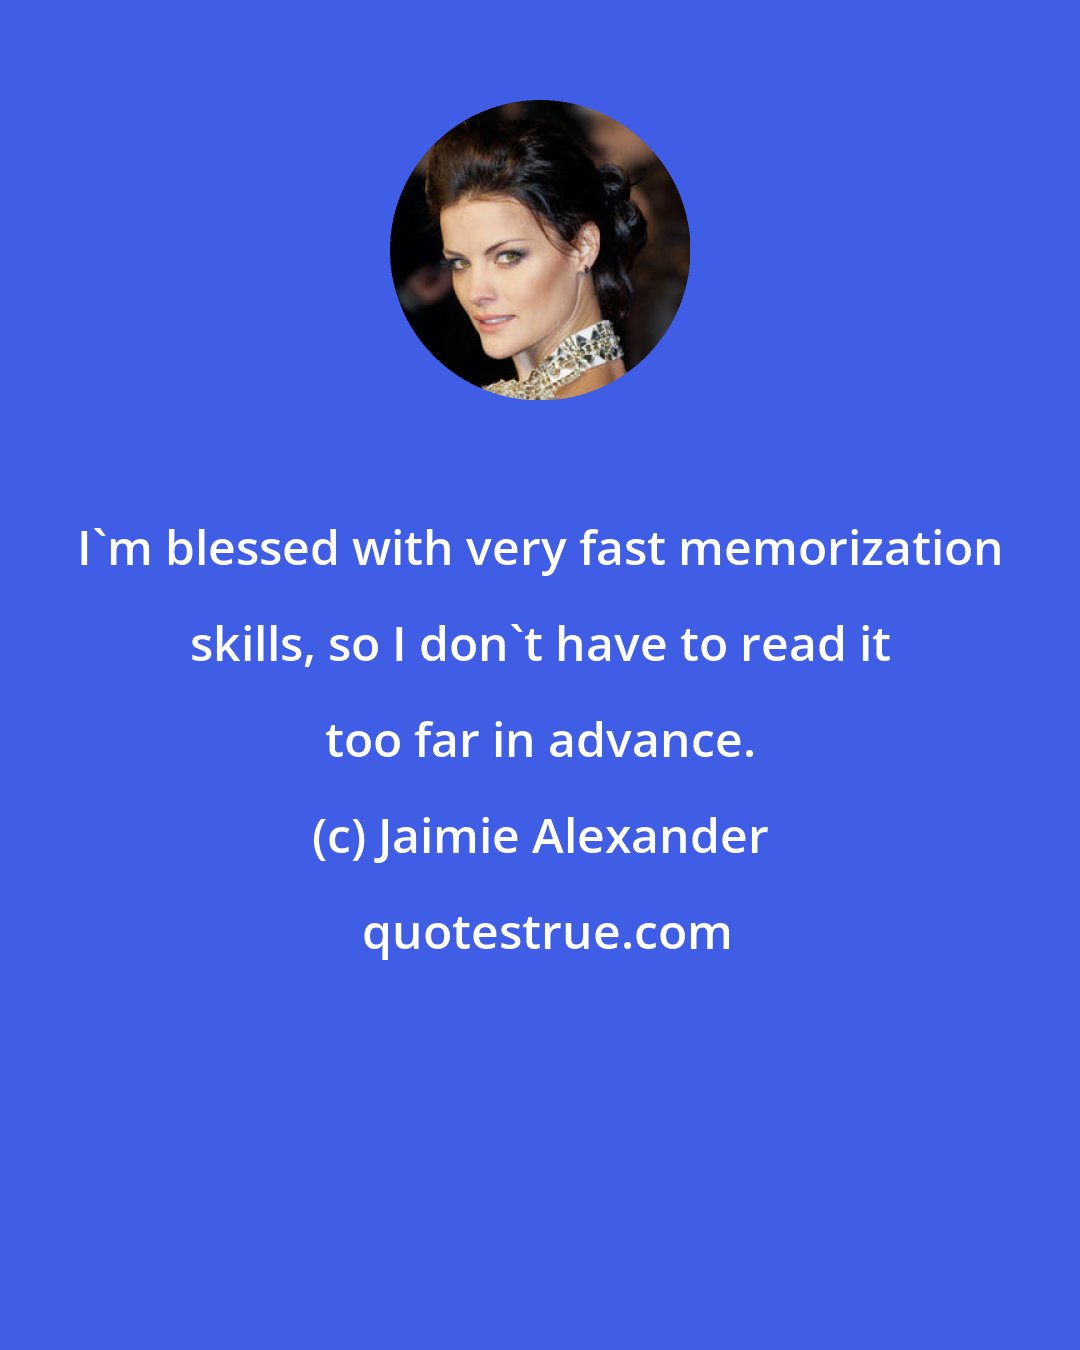 Jaimie Alexander: I'm blessed with very fast memorization skills, so I don't have to read it too far in advance.